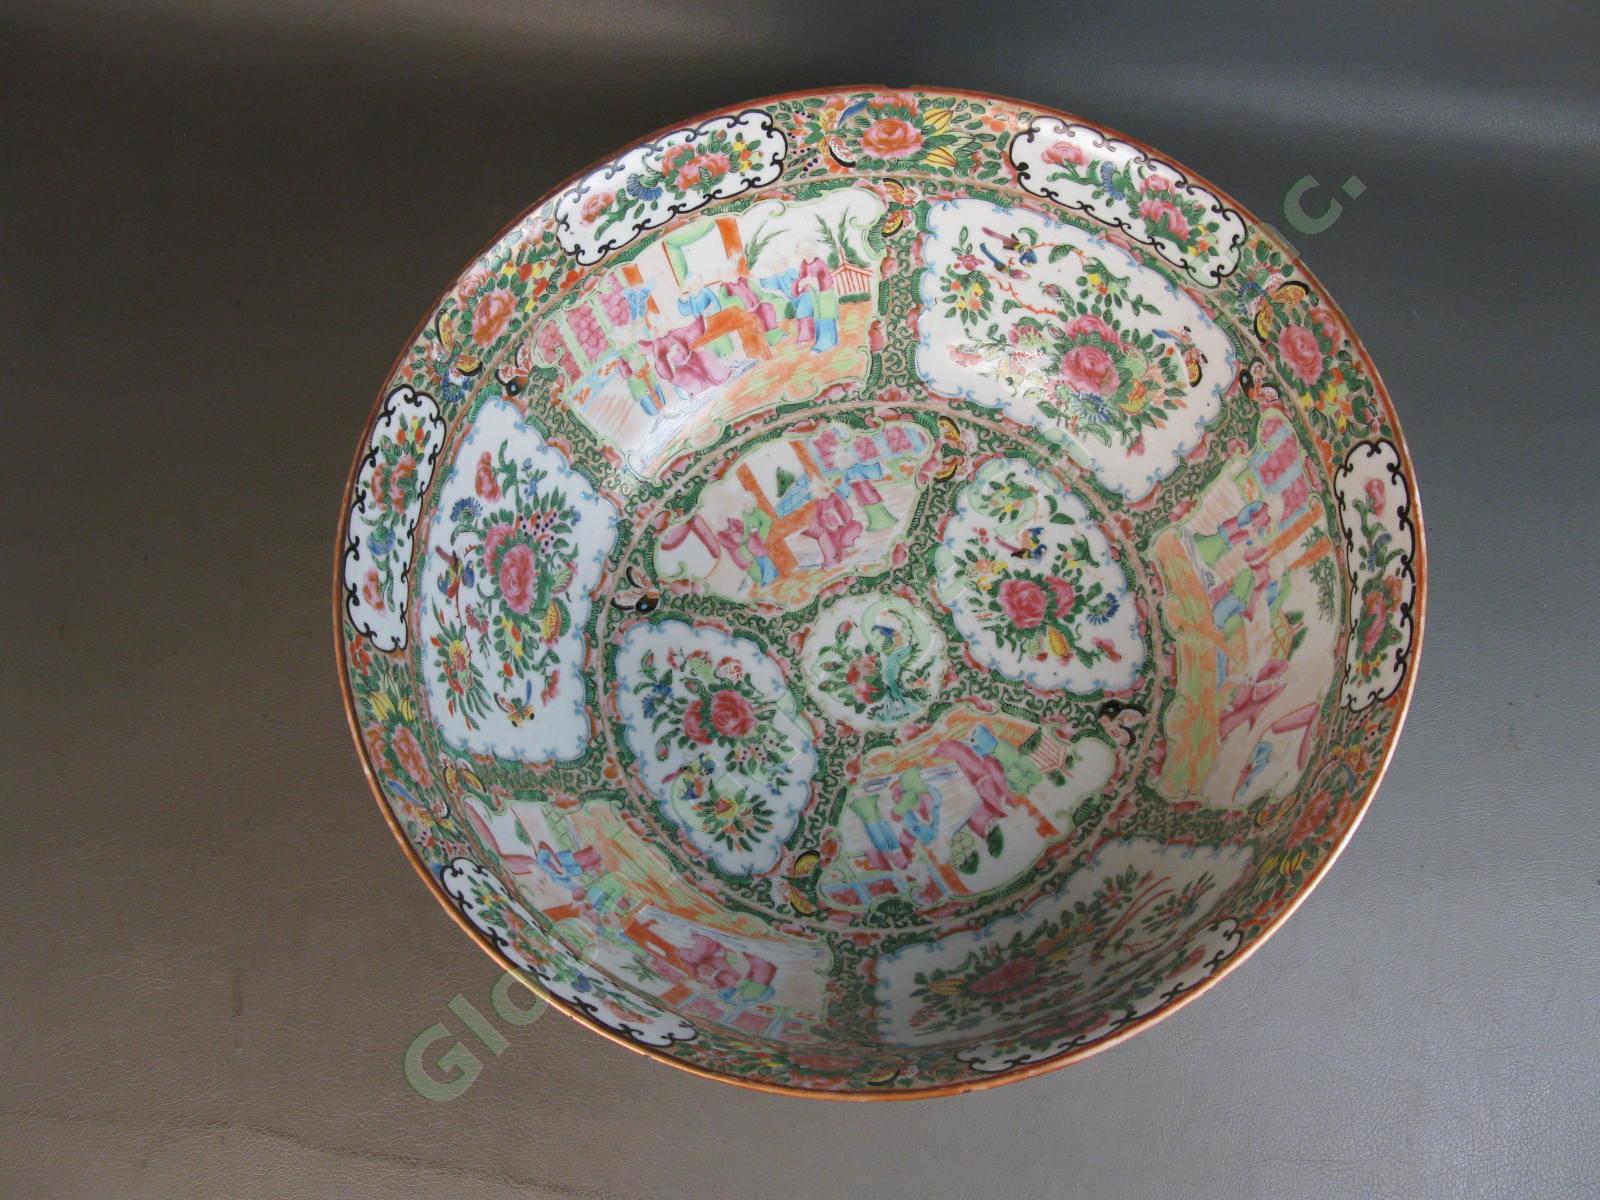 RARE Antique Chinese Early 19th C Large Famille Rose Medallion Punch Bowl 15" NR 1